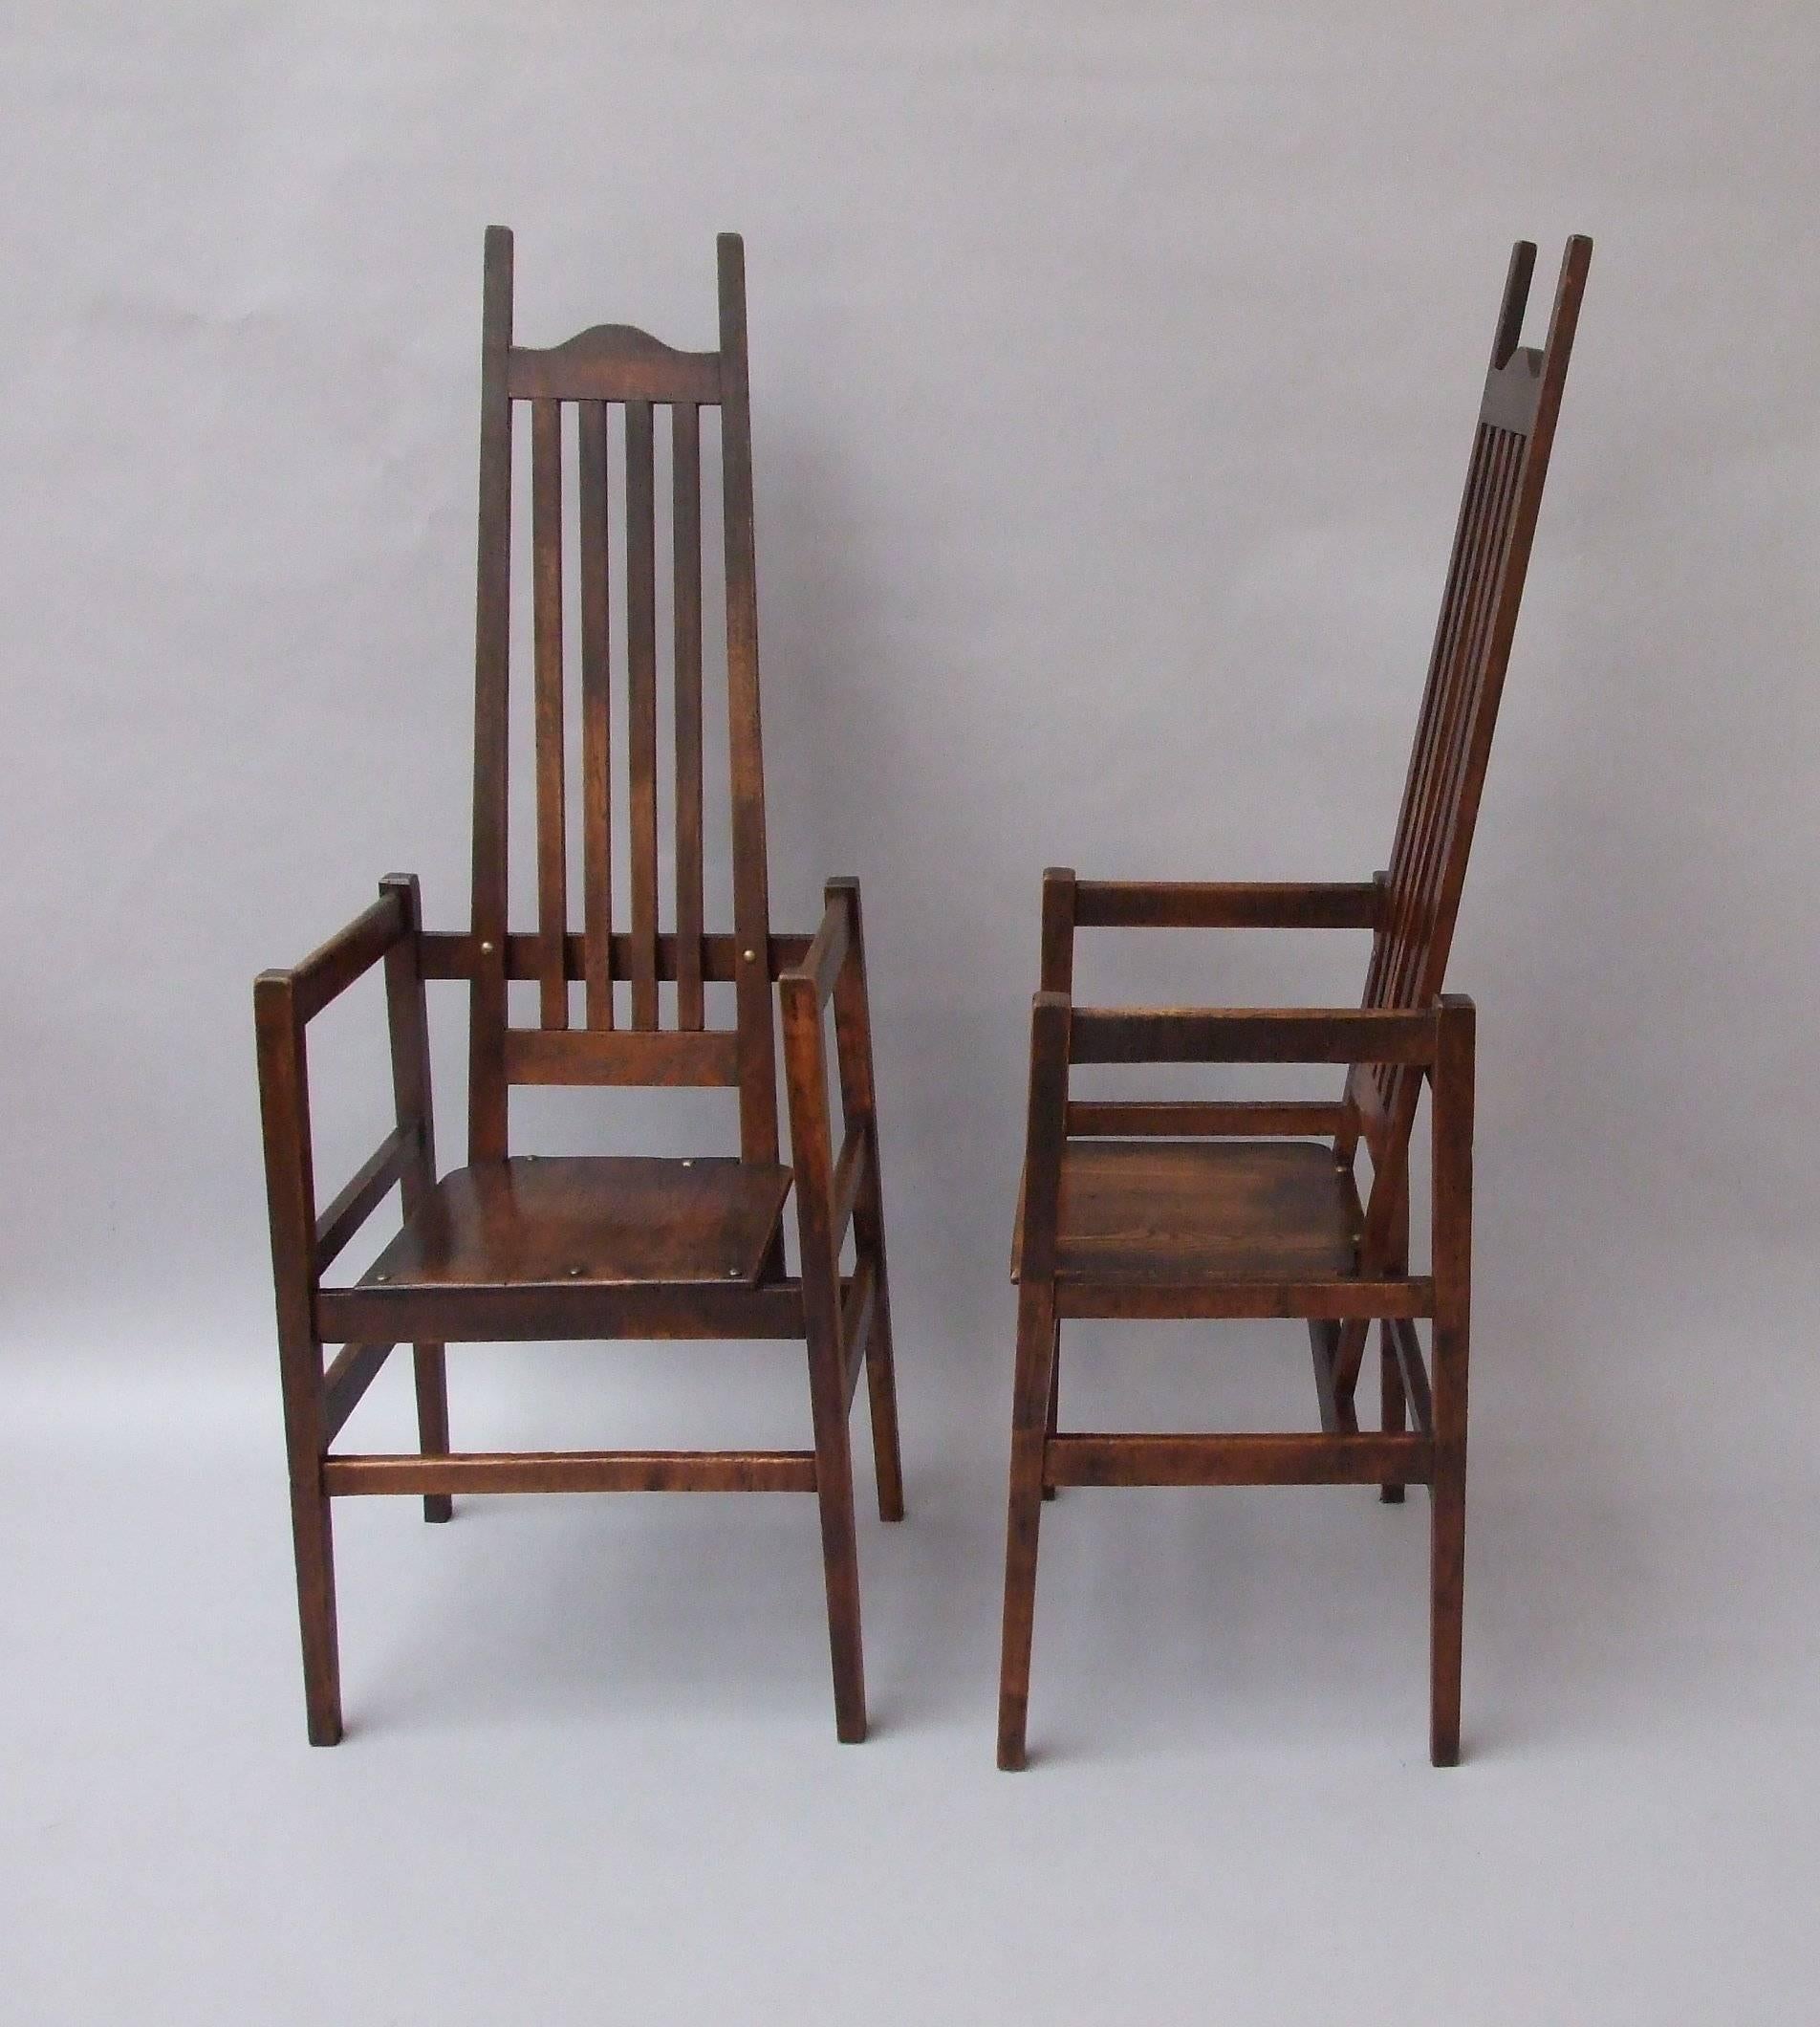 C F A Voysey: A rare pair of oak armchairs with slats to the sloped tall backs and tall stiles either side. there are brass studs to the seats and the back rails, originally designed for The Homestead, Frinton-on-Sea, where both the house and the